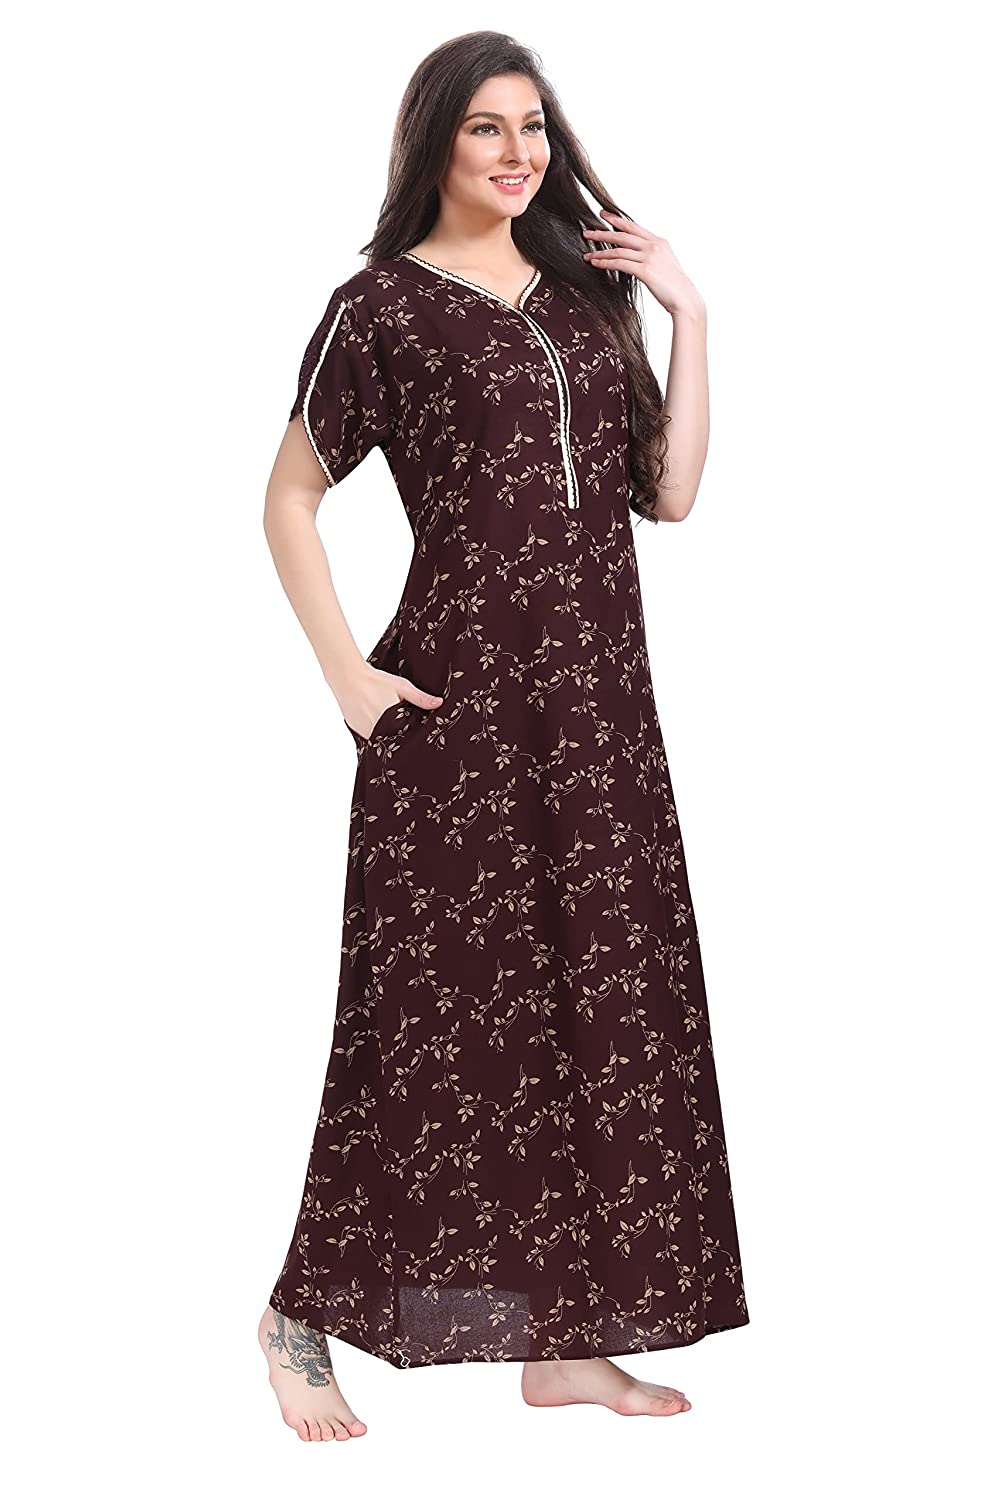 Front Zip Multicolor Women's Cotton Hosiery Night Gowns at Rs 350